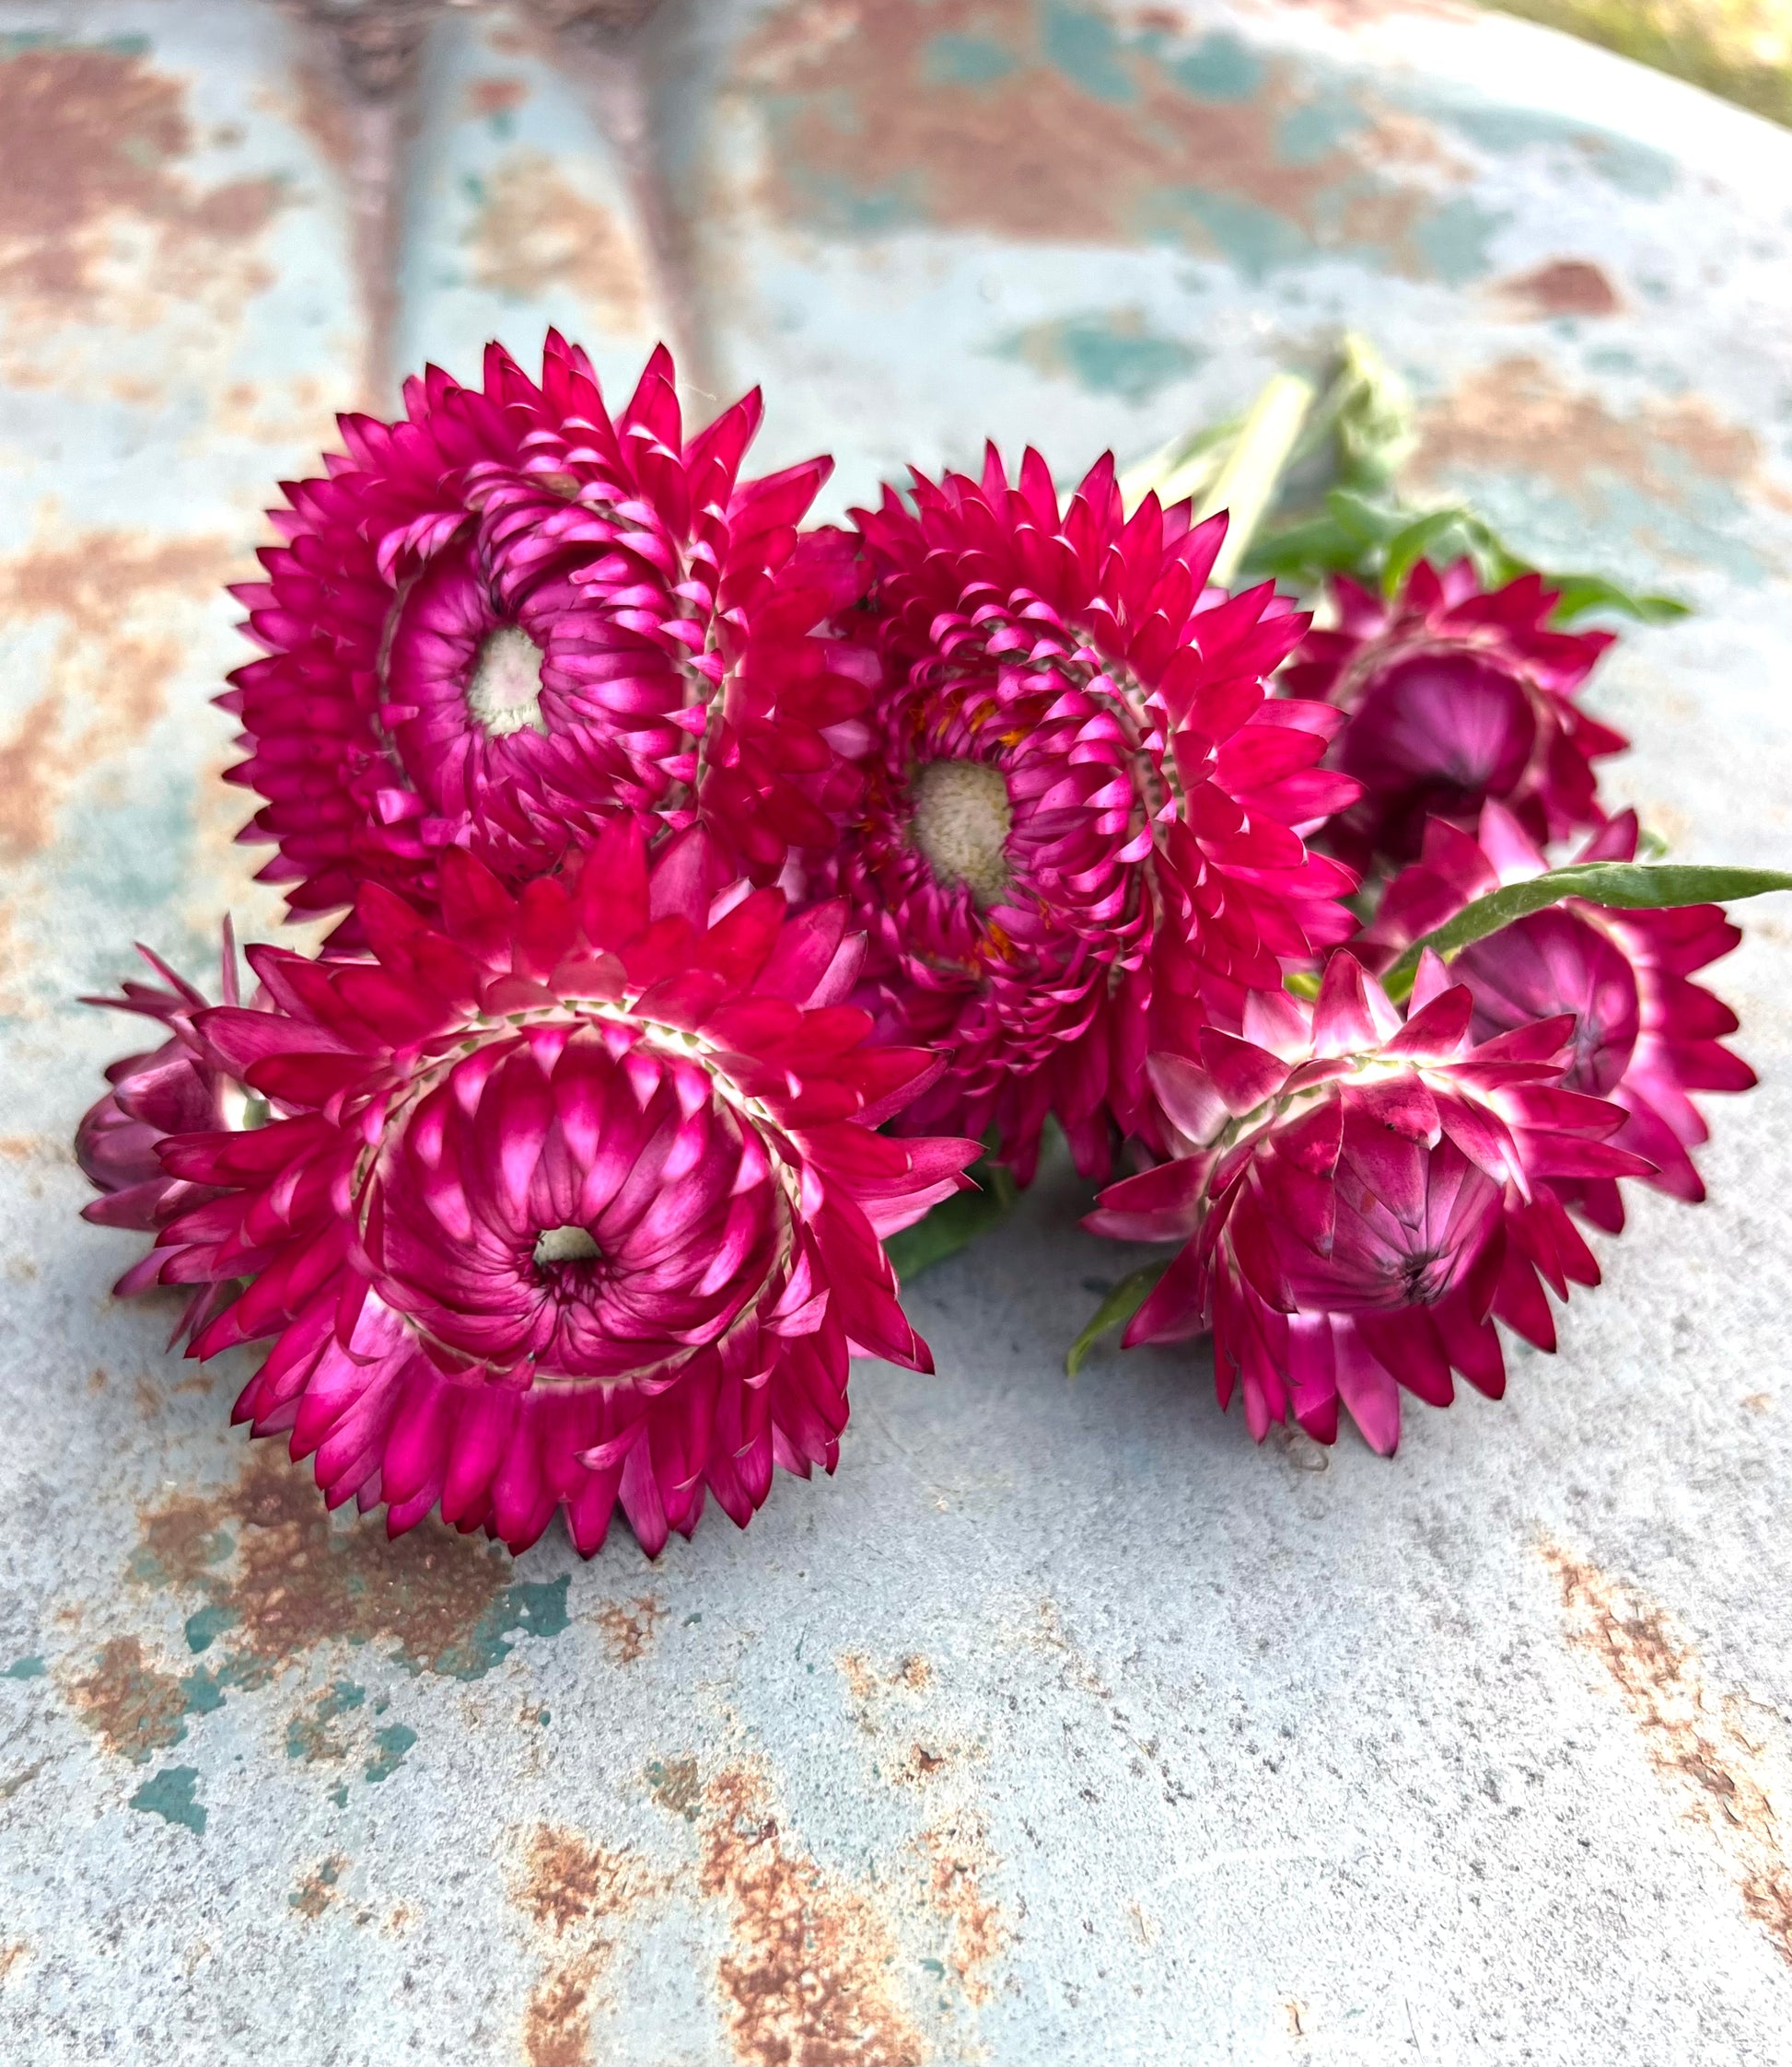 Raspberry rose strawflowers for dried floral crafts